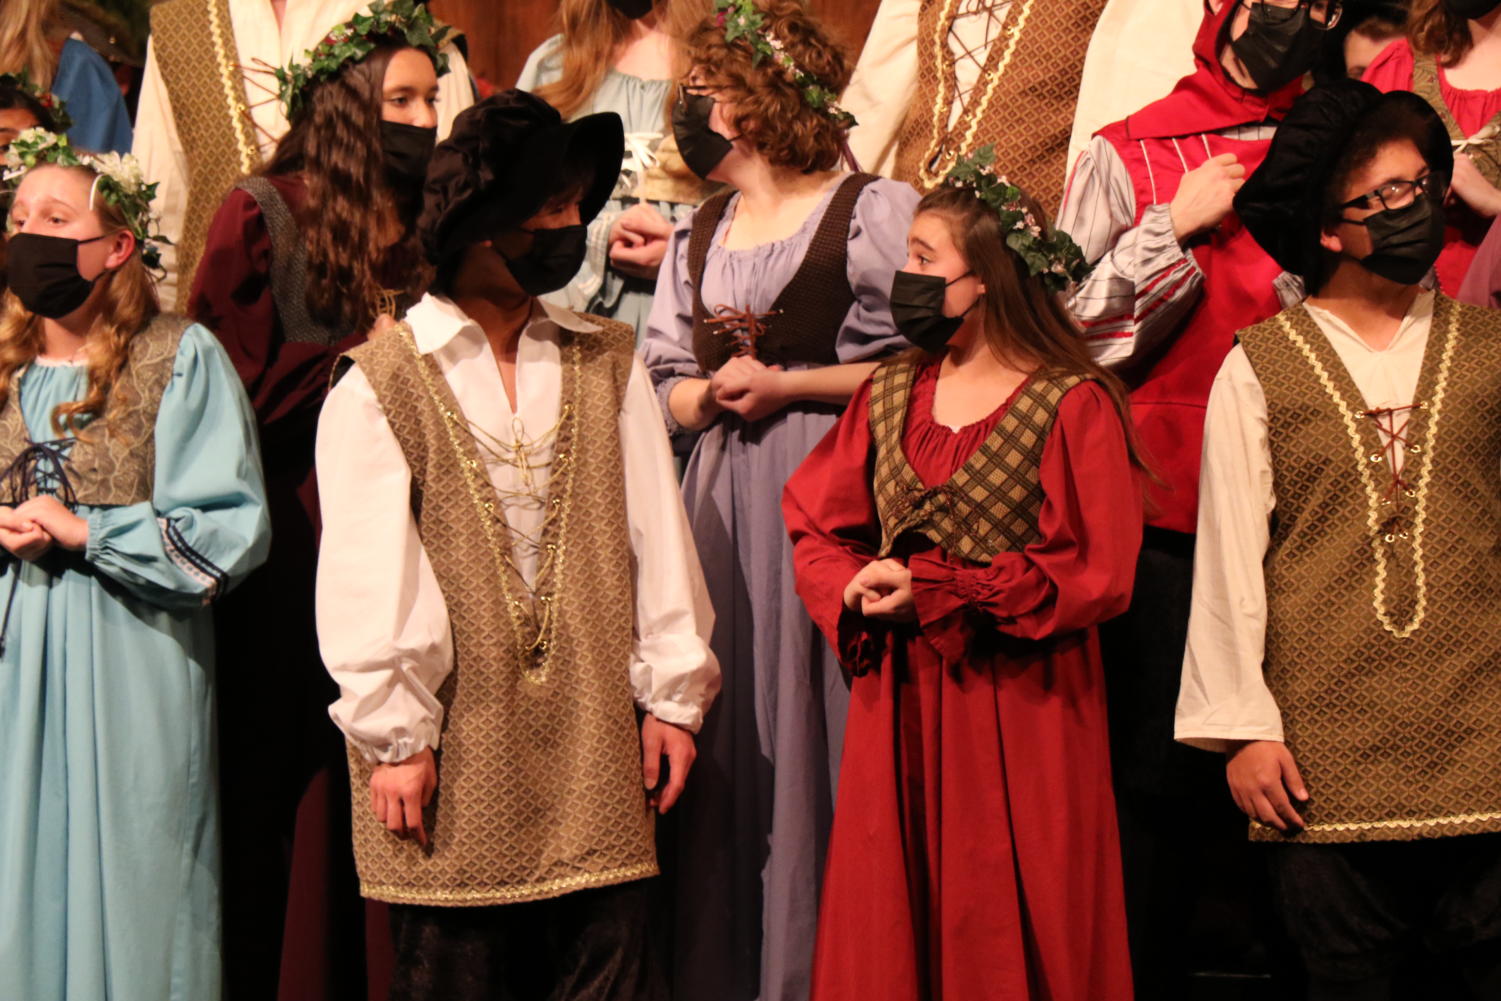 Madrigals+returns+in-person+%5Bphoto+gallery%5D